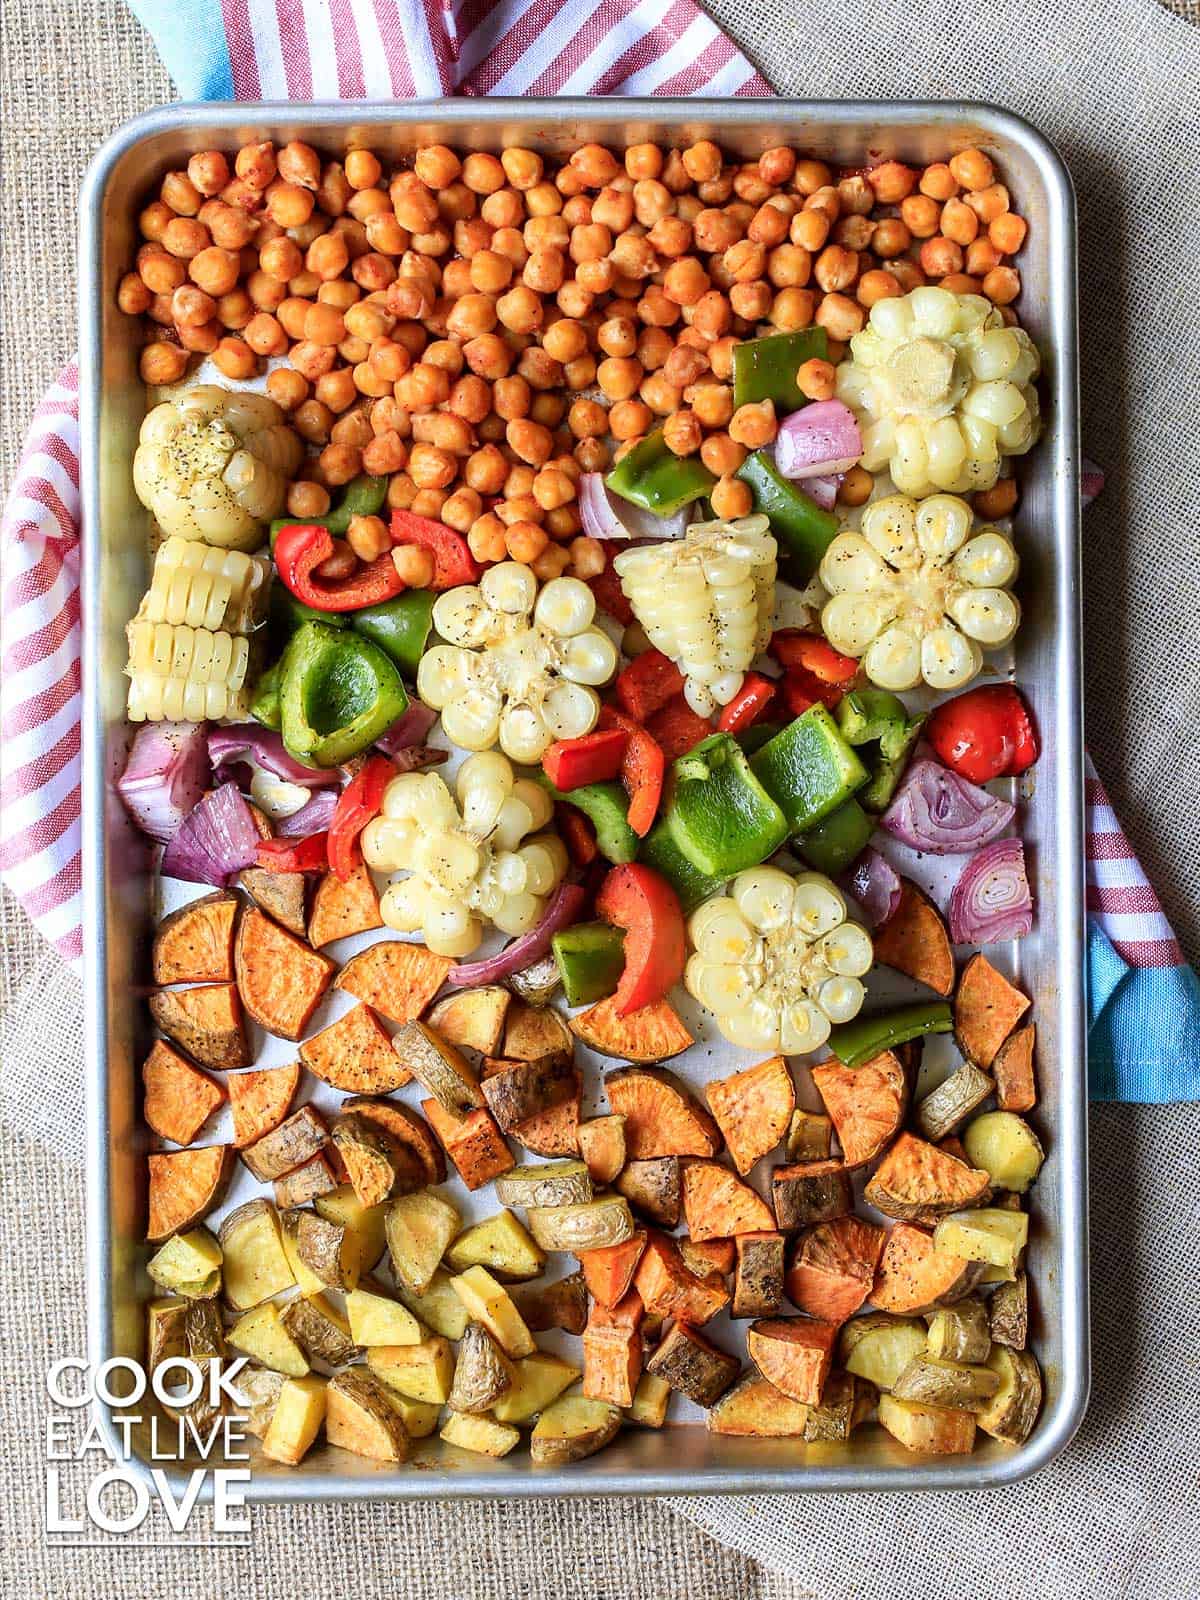 BBQ chickpeas and veggies cooked and ready on the sheet pan